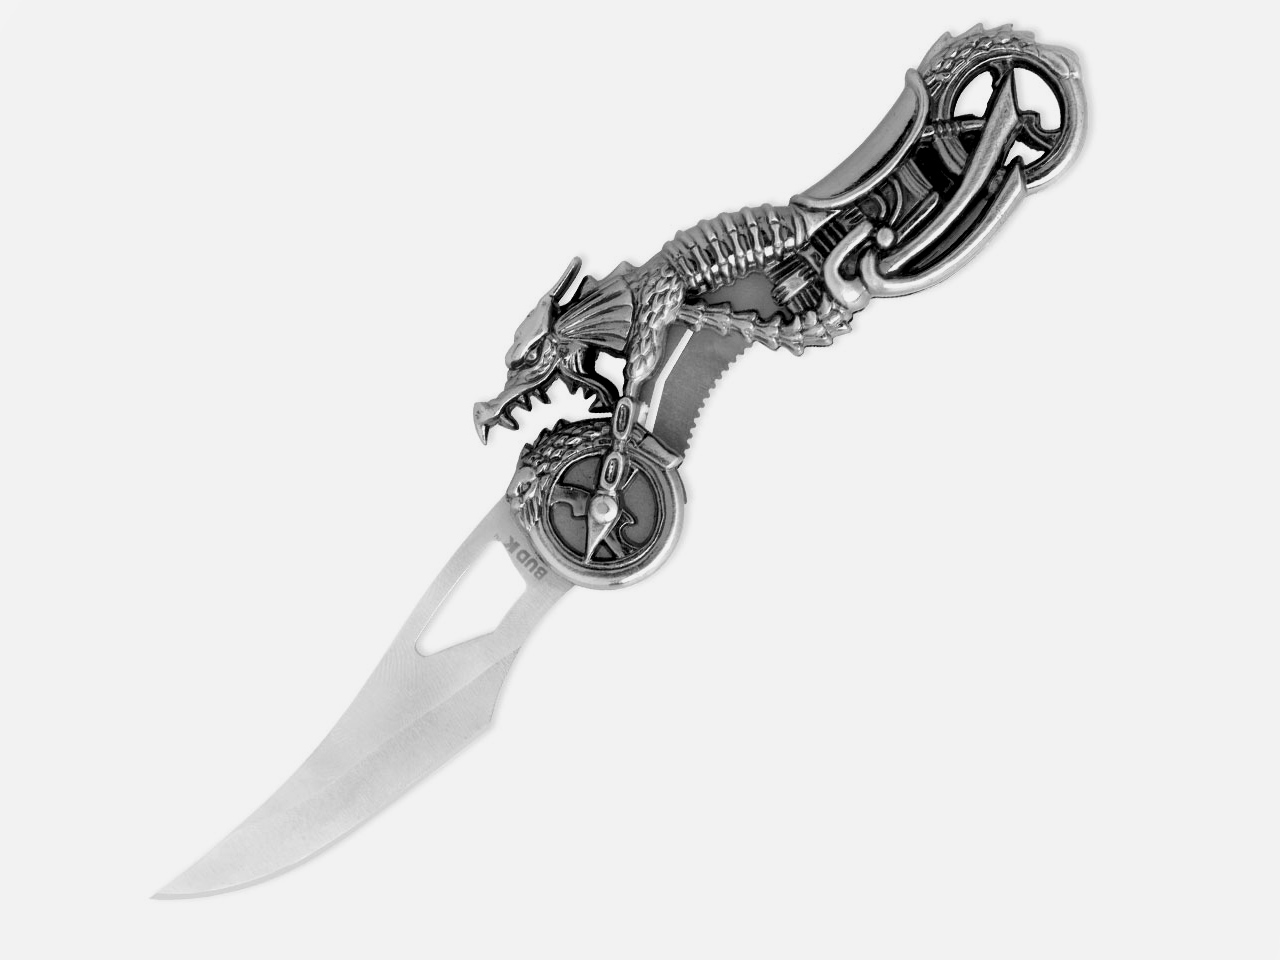 Download High quality moto Knives wallpaper / 1280x960